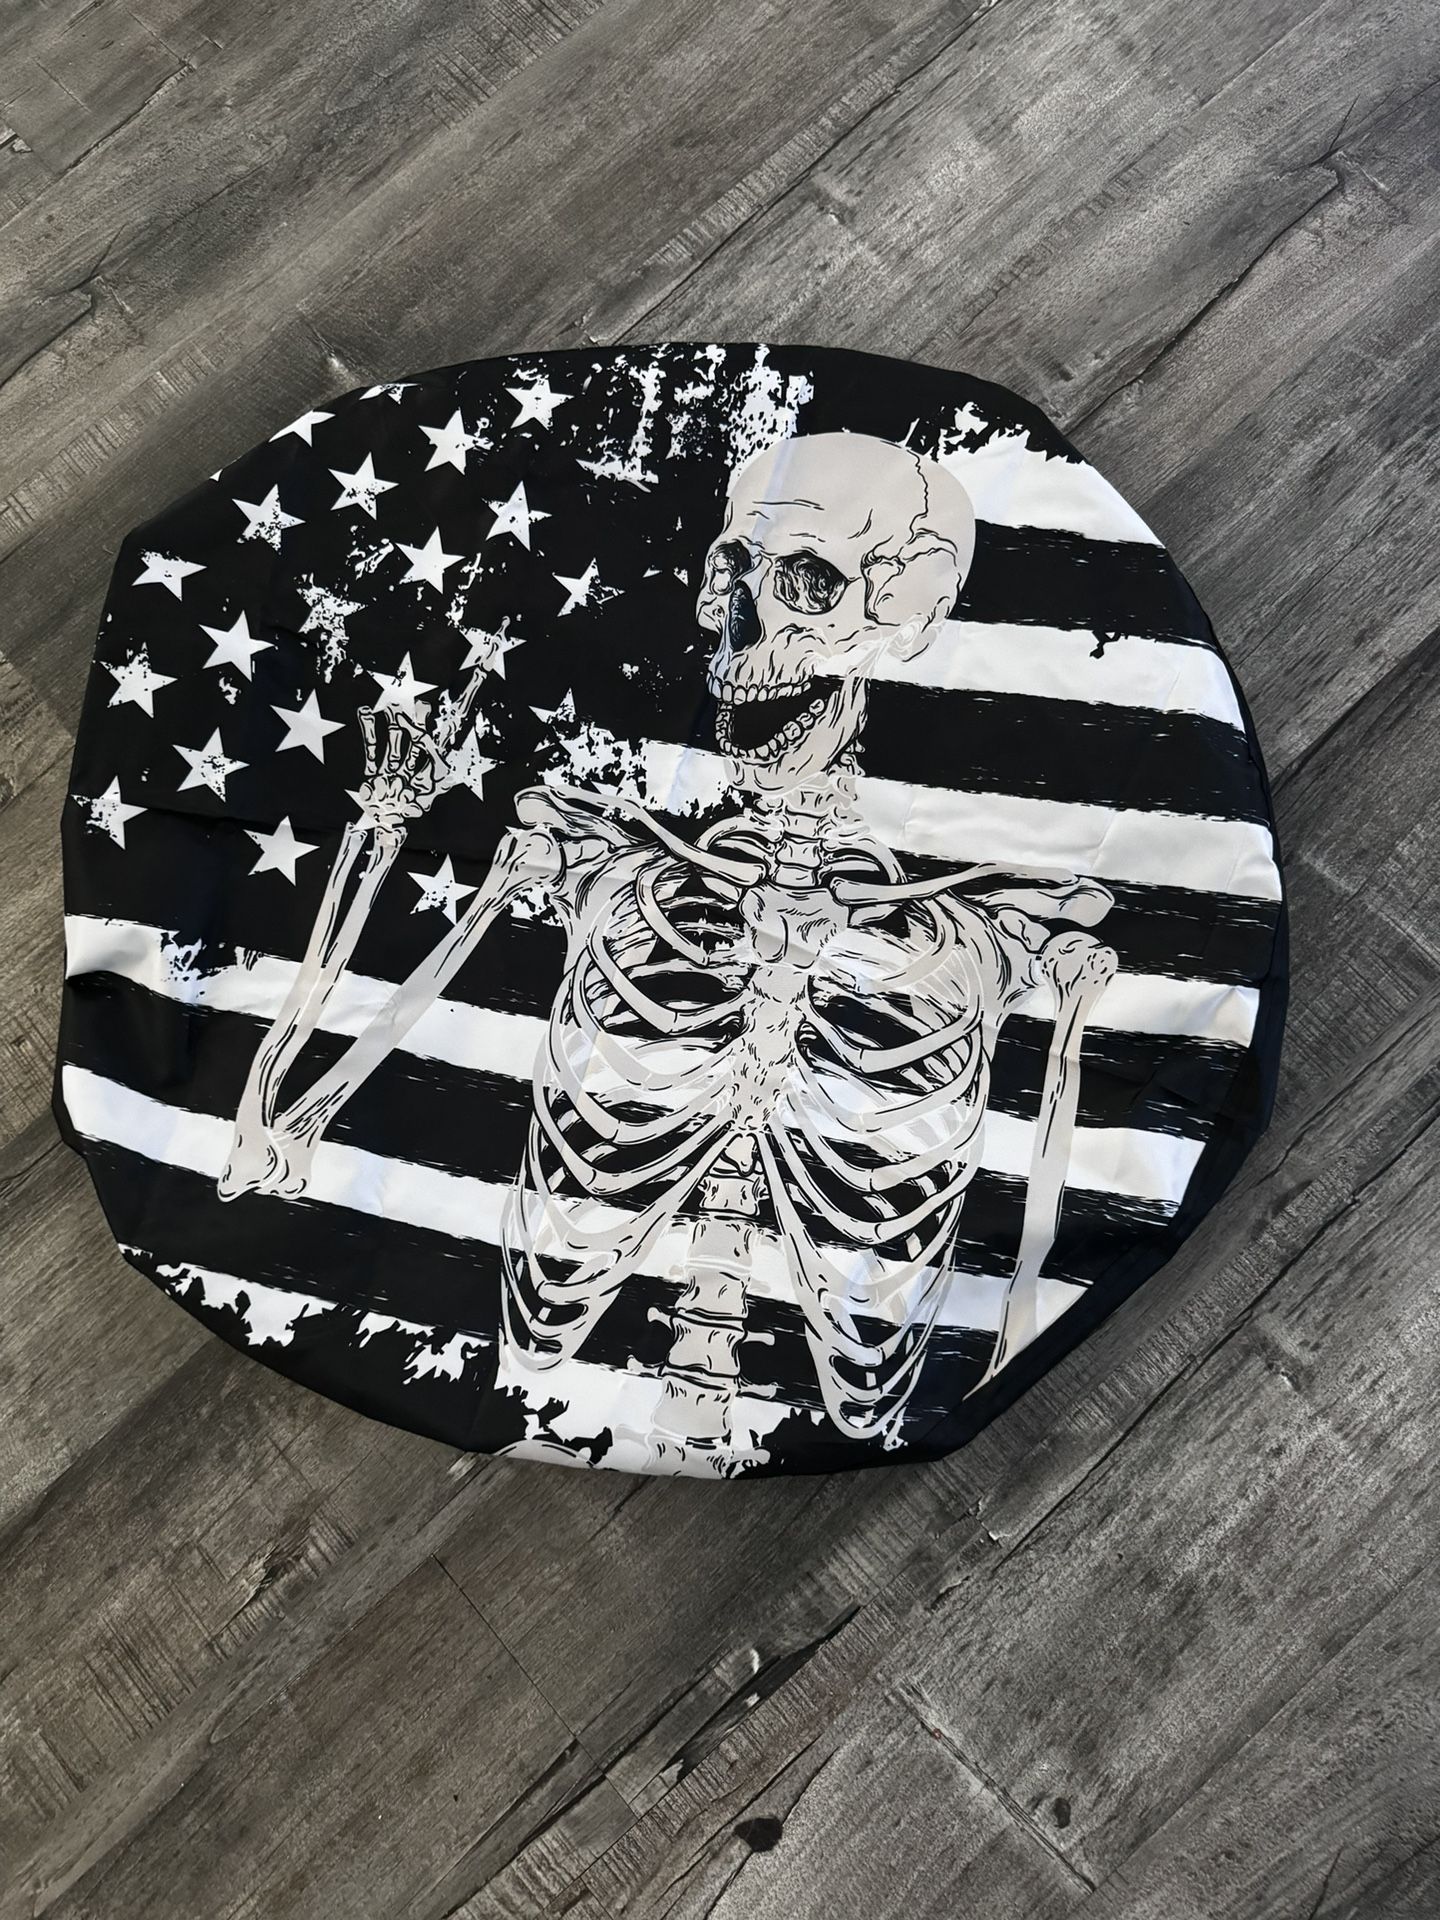 Human Skeleton ,American Flag Spare Tire Cover, RV. Jeep Off Road Vehicles .